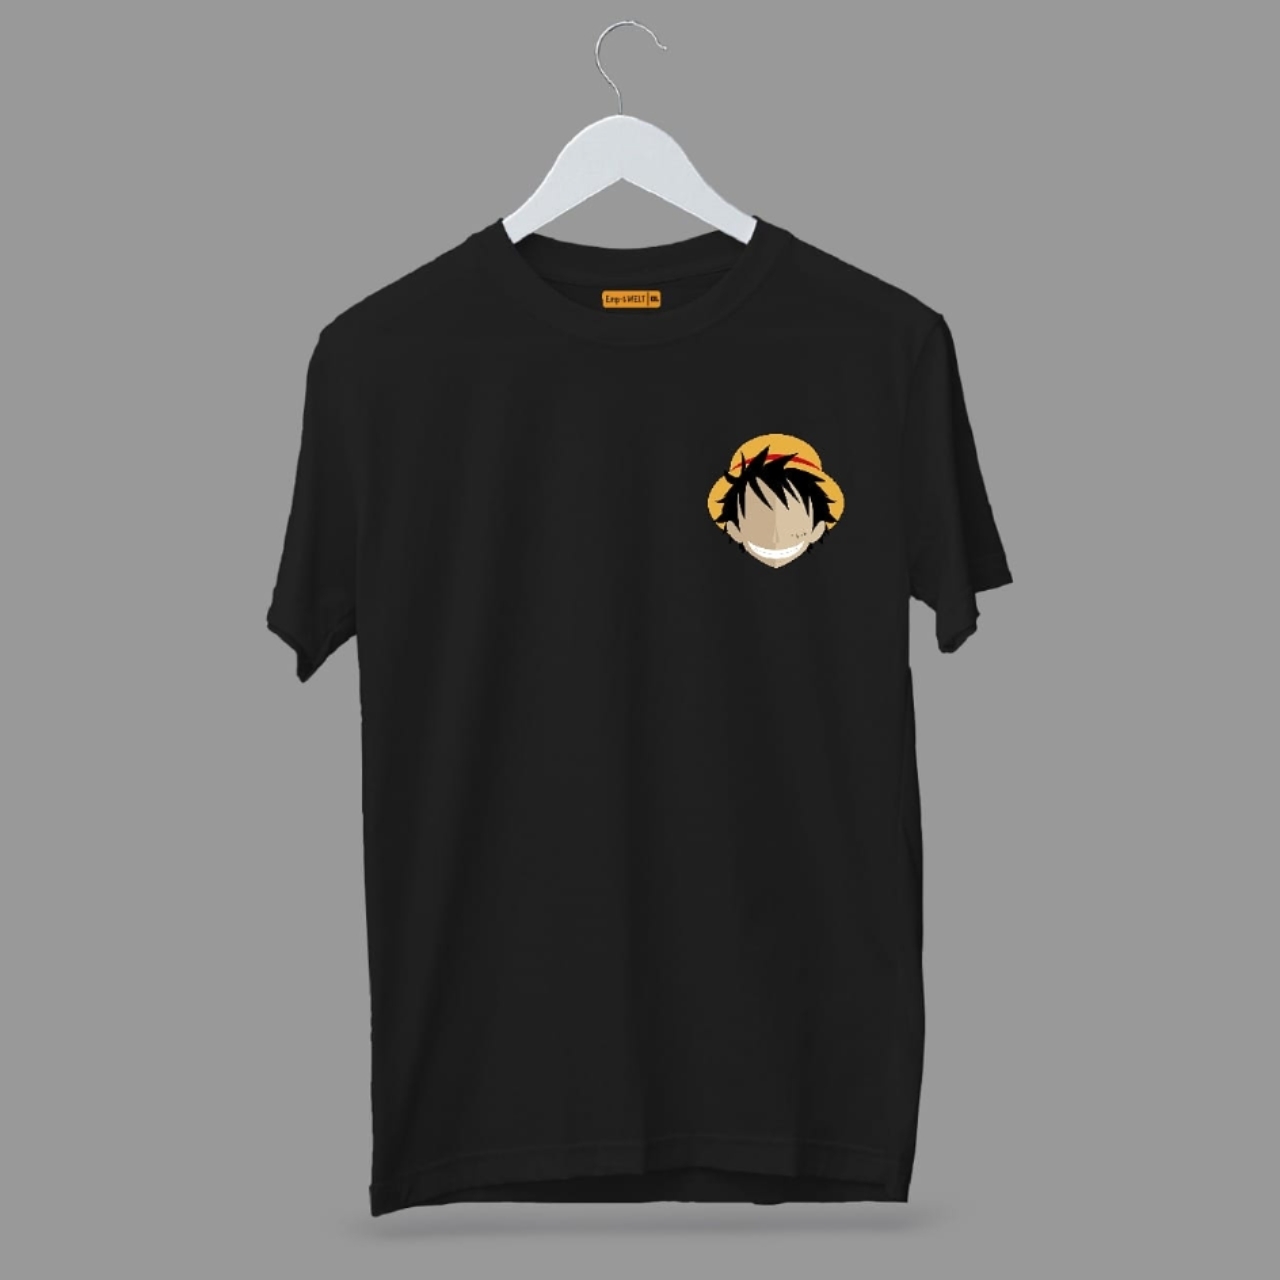 Pocket sized one piece Tees